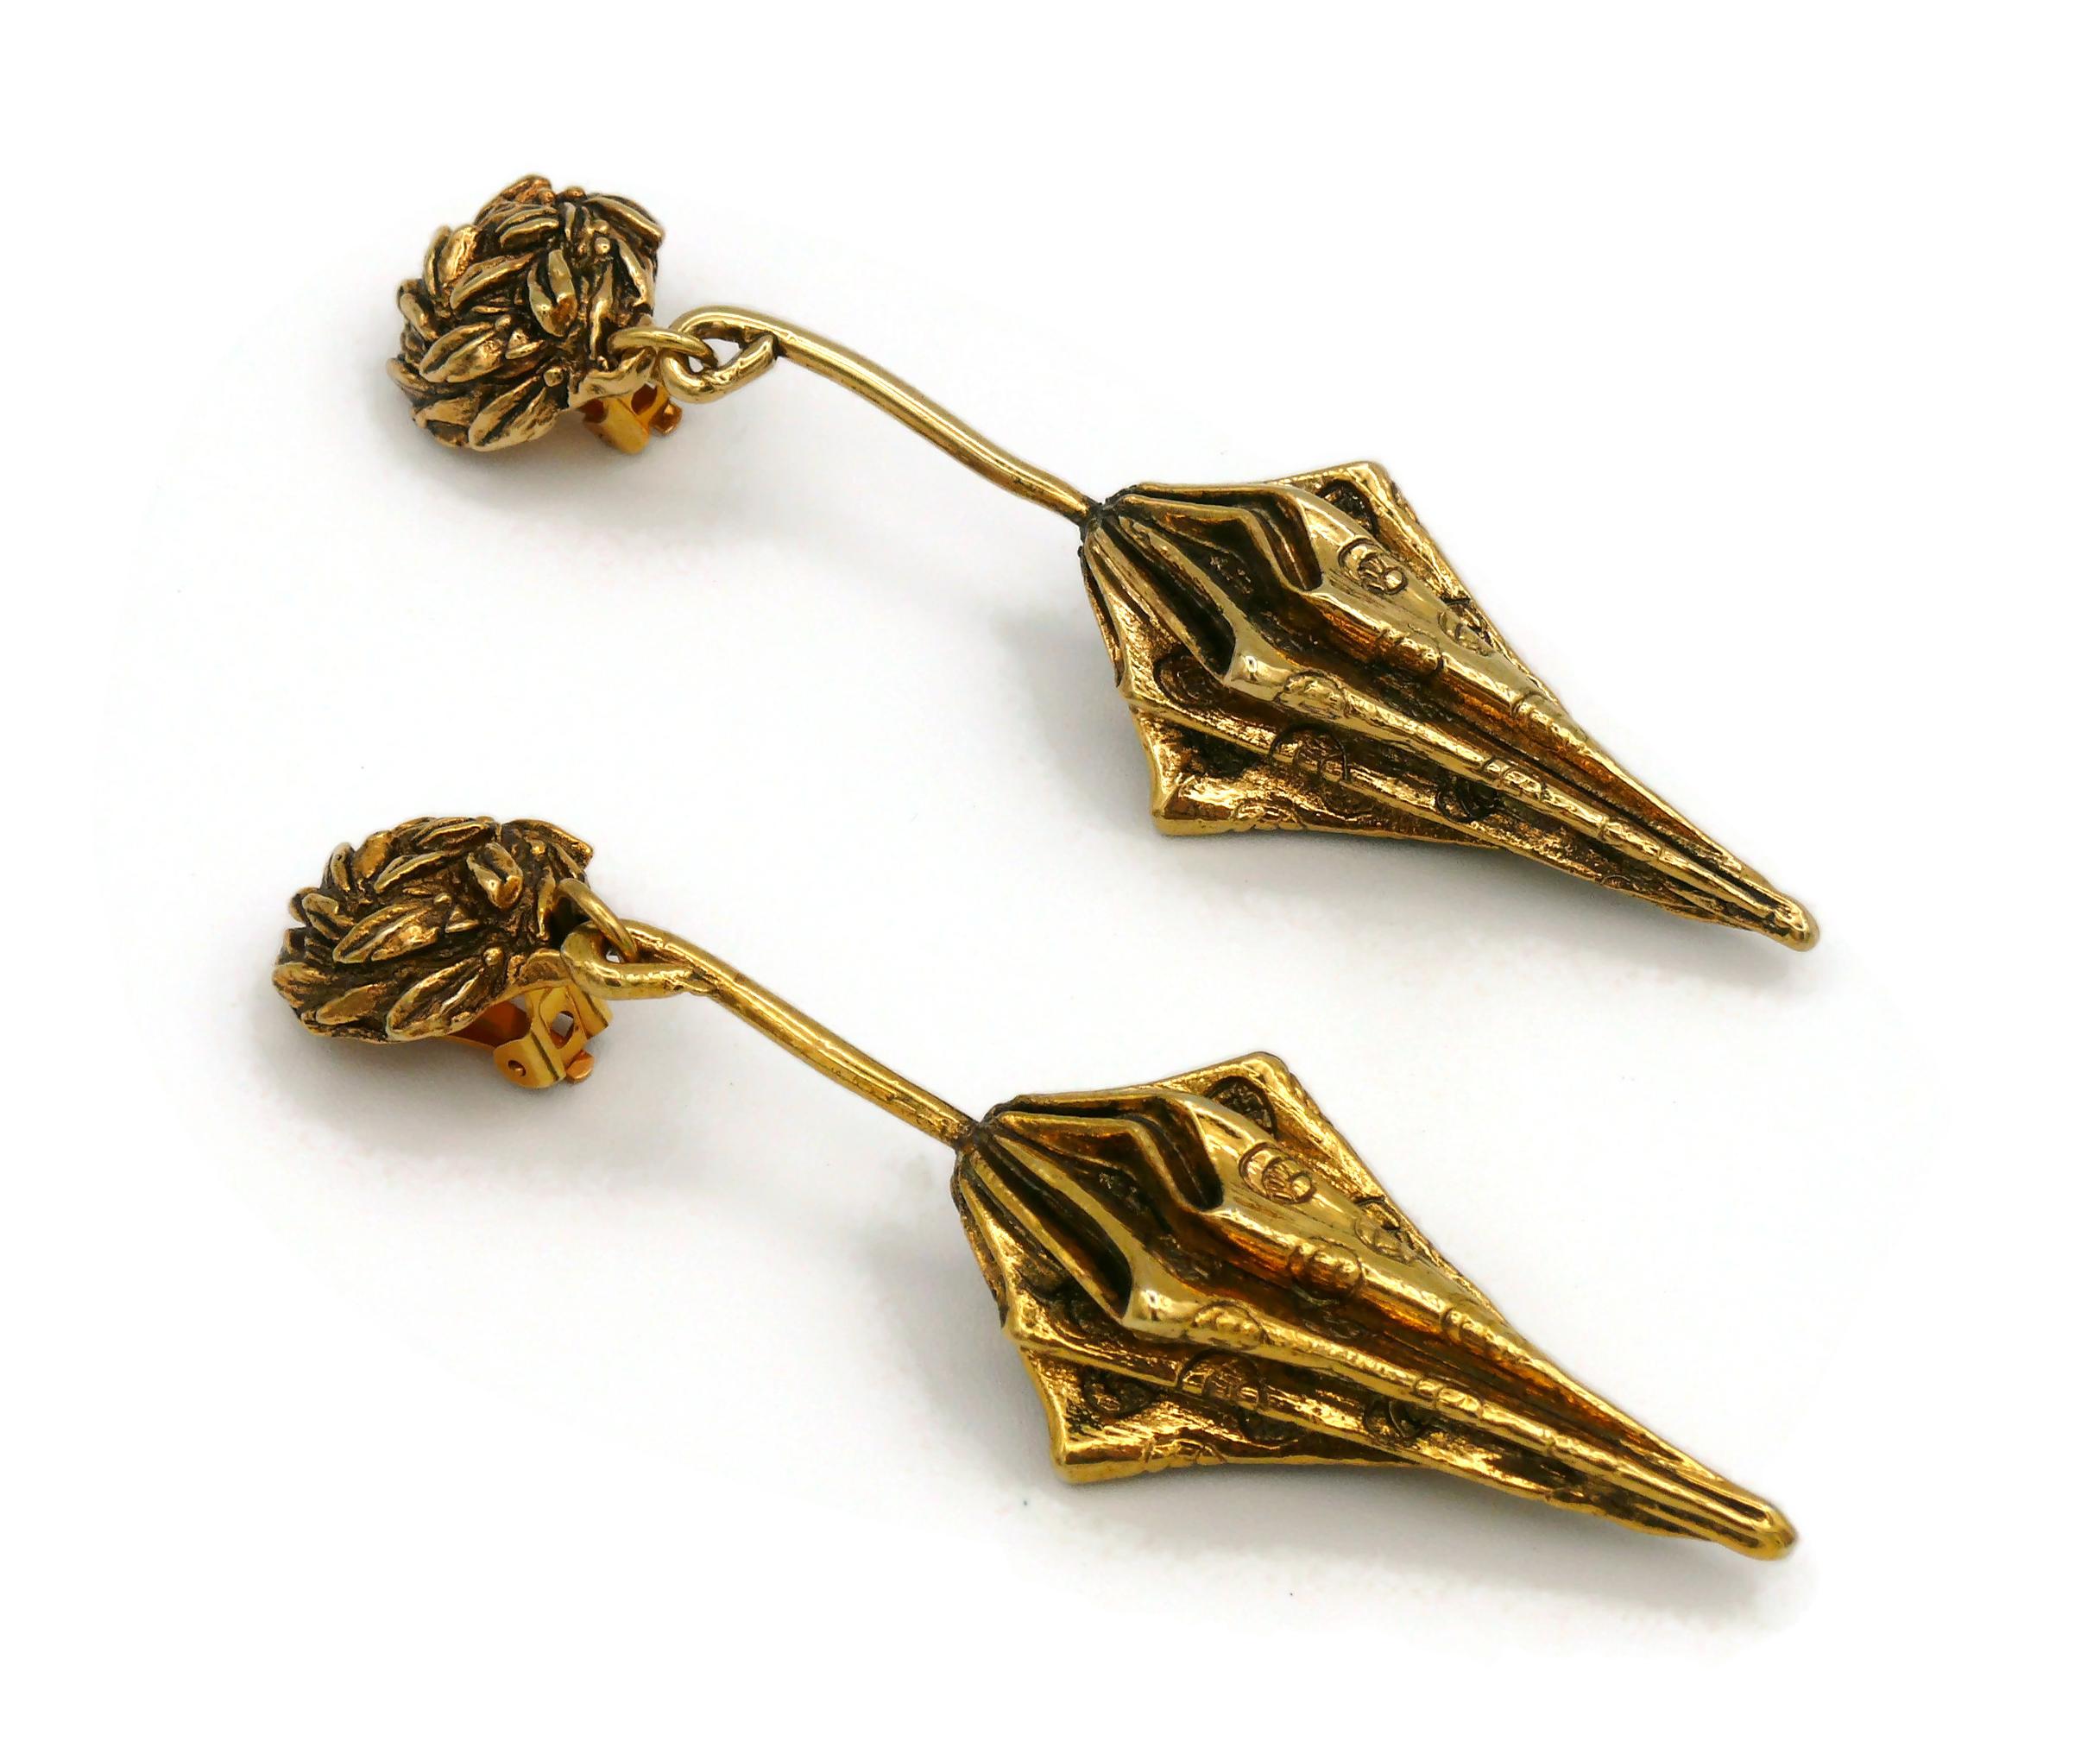 Chantal Thomass (Attributed to) Vintage Umbrella Dangling Earrings For Sale 1